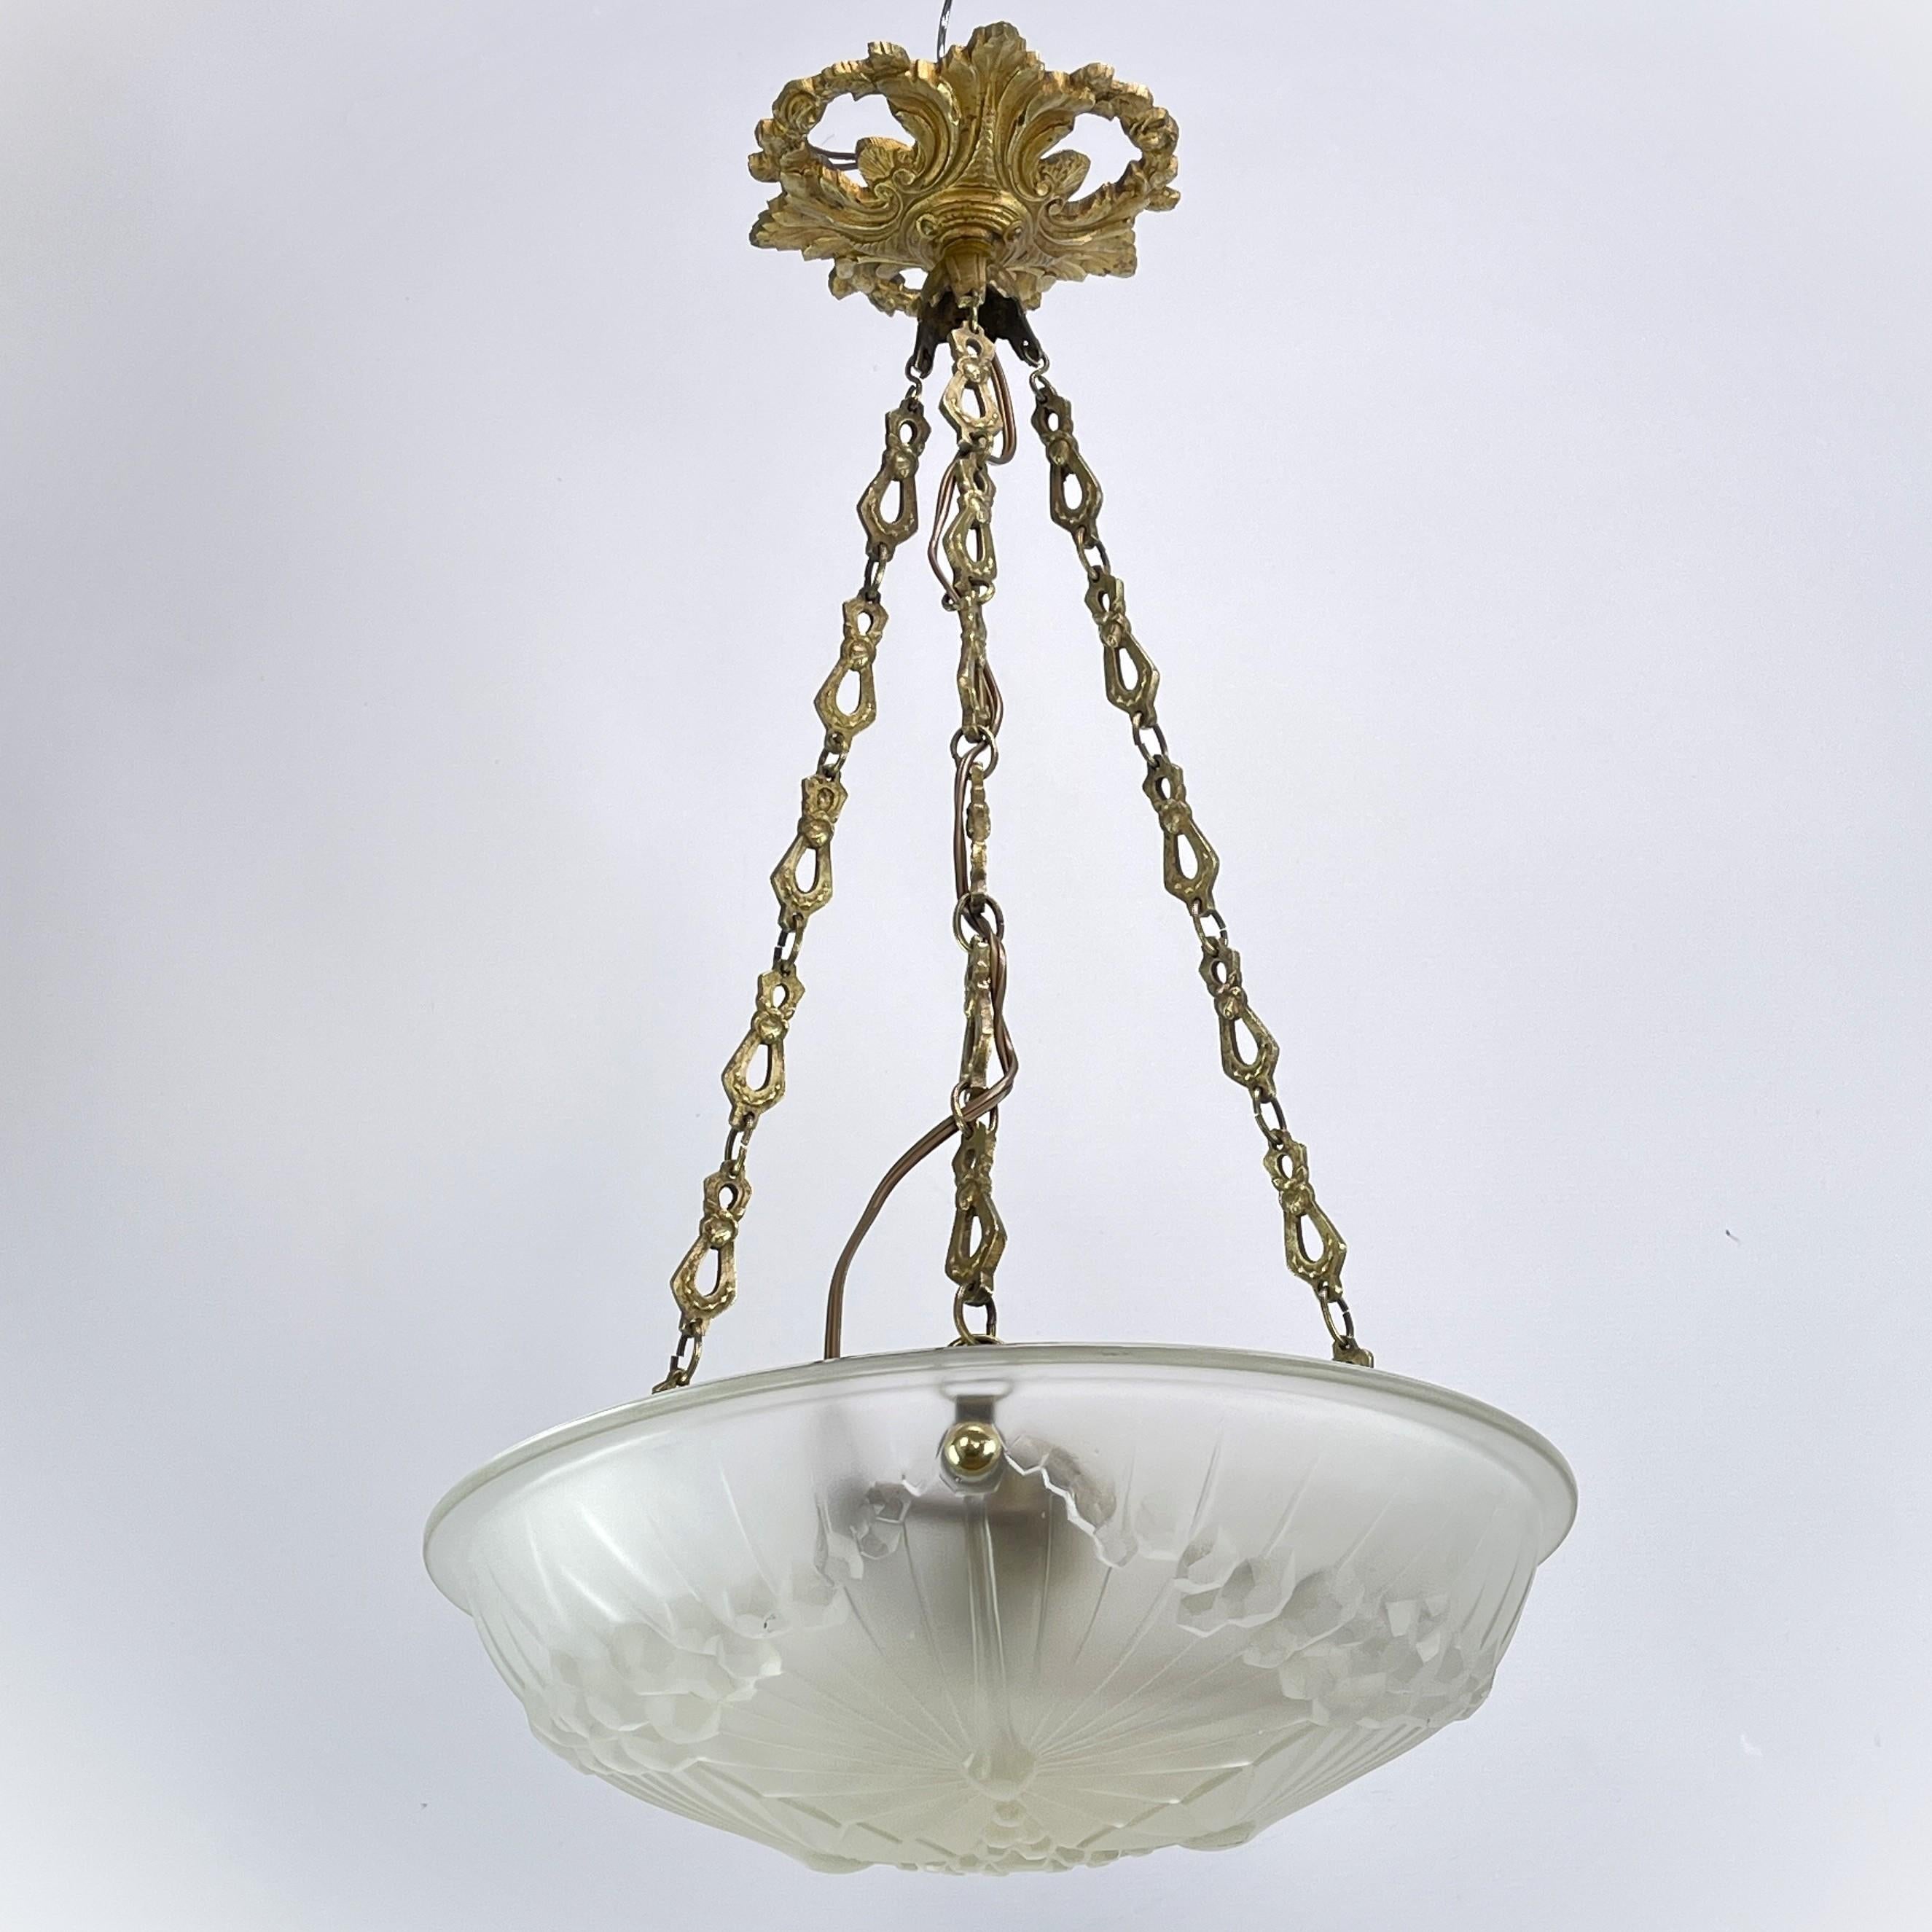 French Art Deco ceiling lamp bronze glass bowl, 1930s